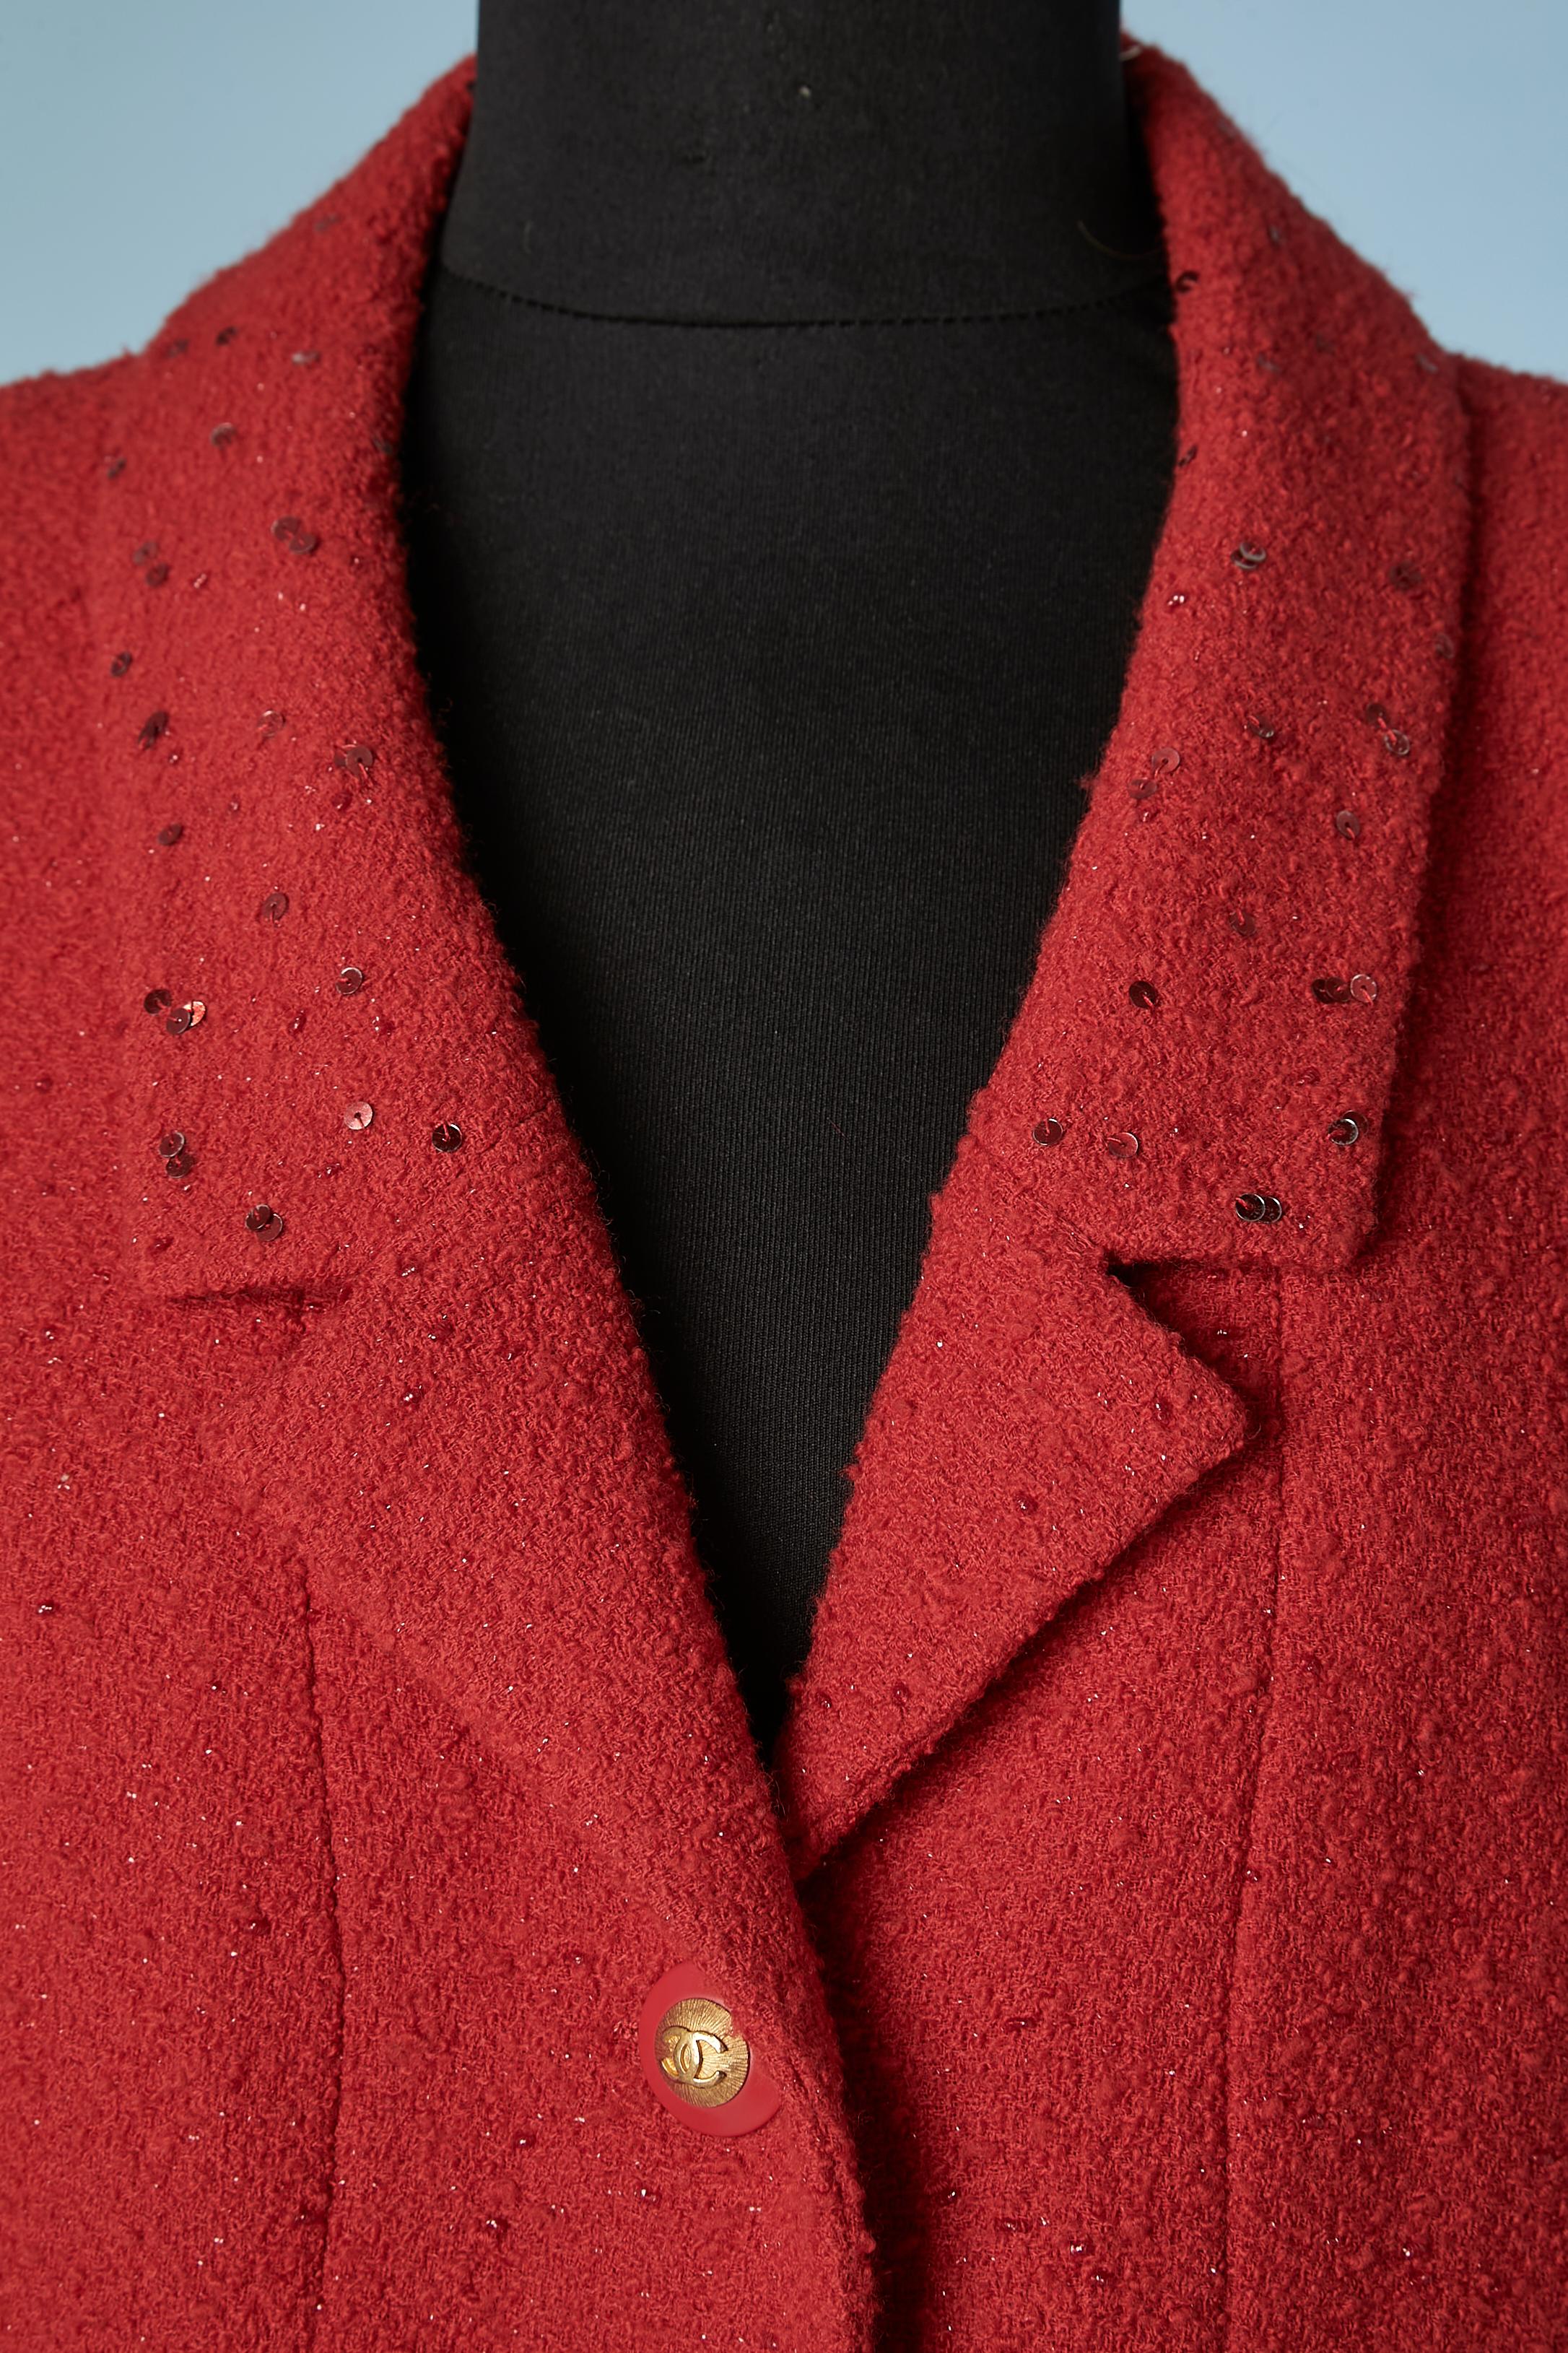 Red tweed single-breasted jacket with red sequin and silk branded lining. Branded buttons. Shoulder pads. Chain inside the jacket on the bottom edge. 
SIZE L 